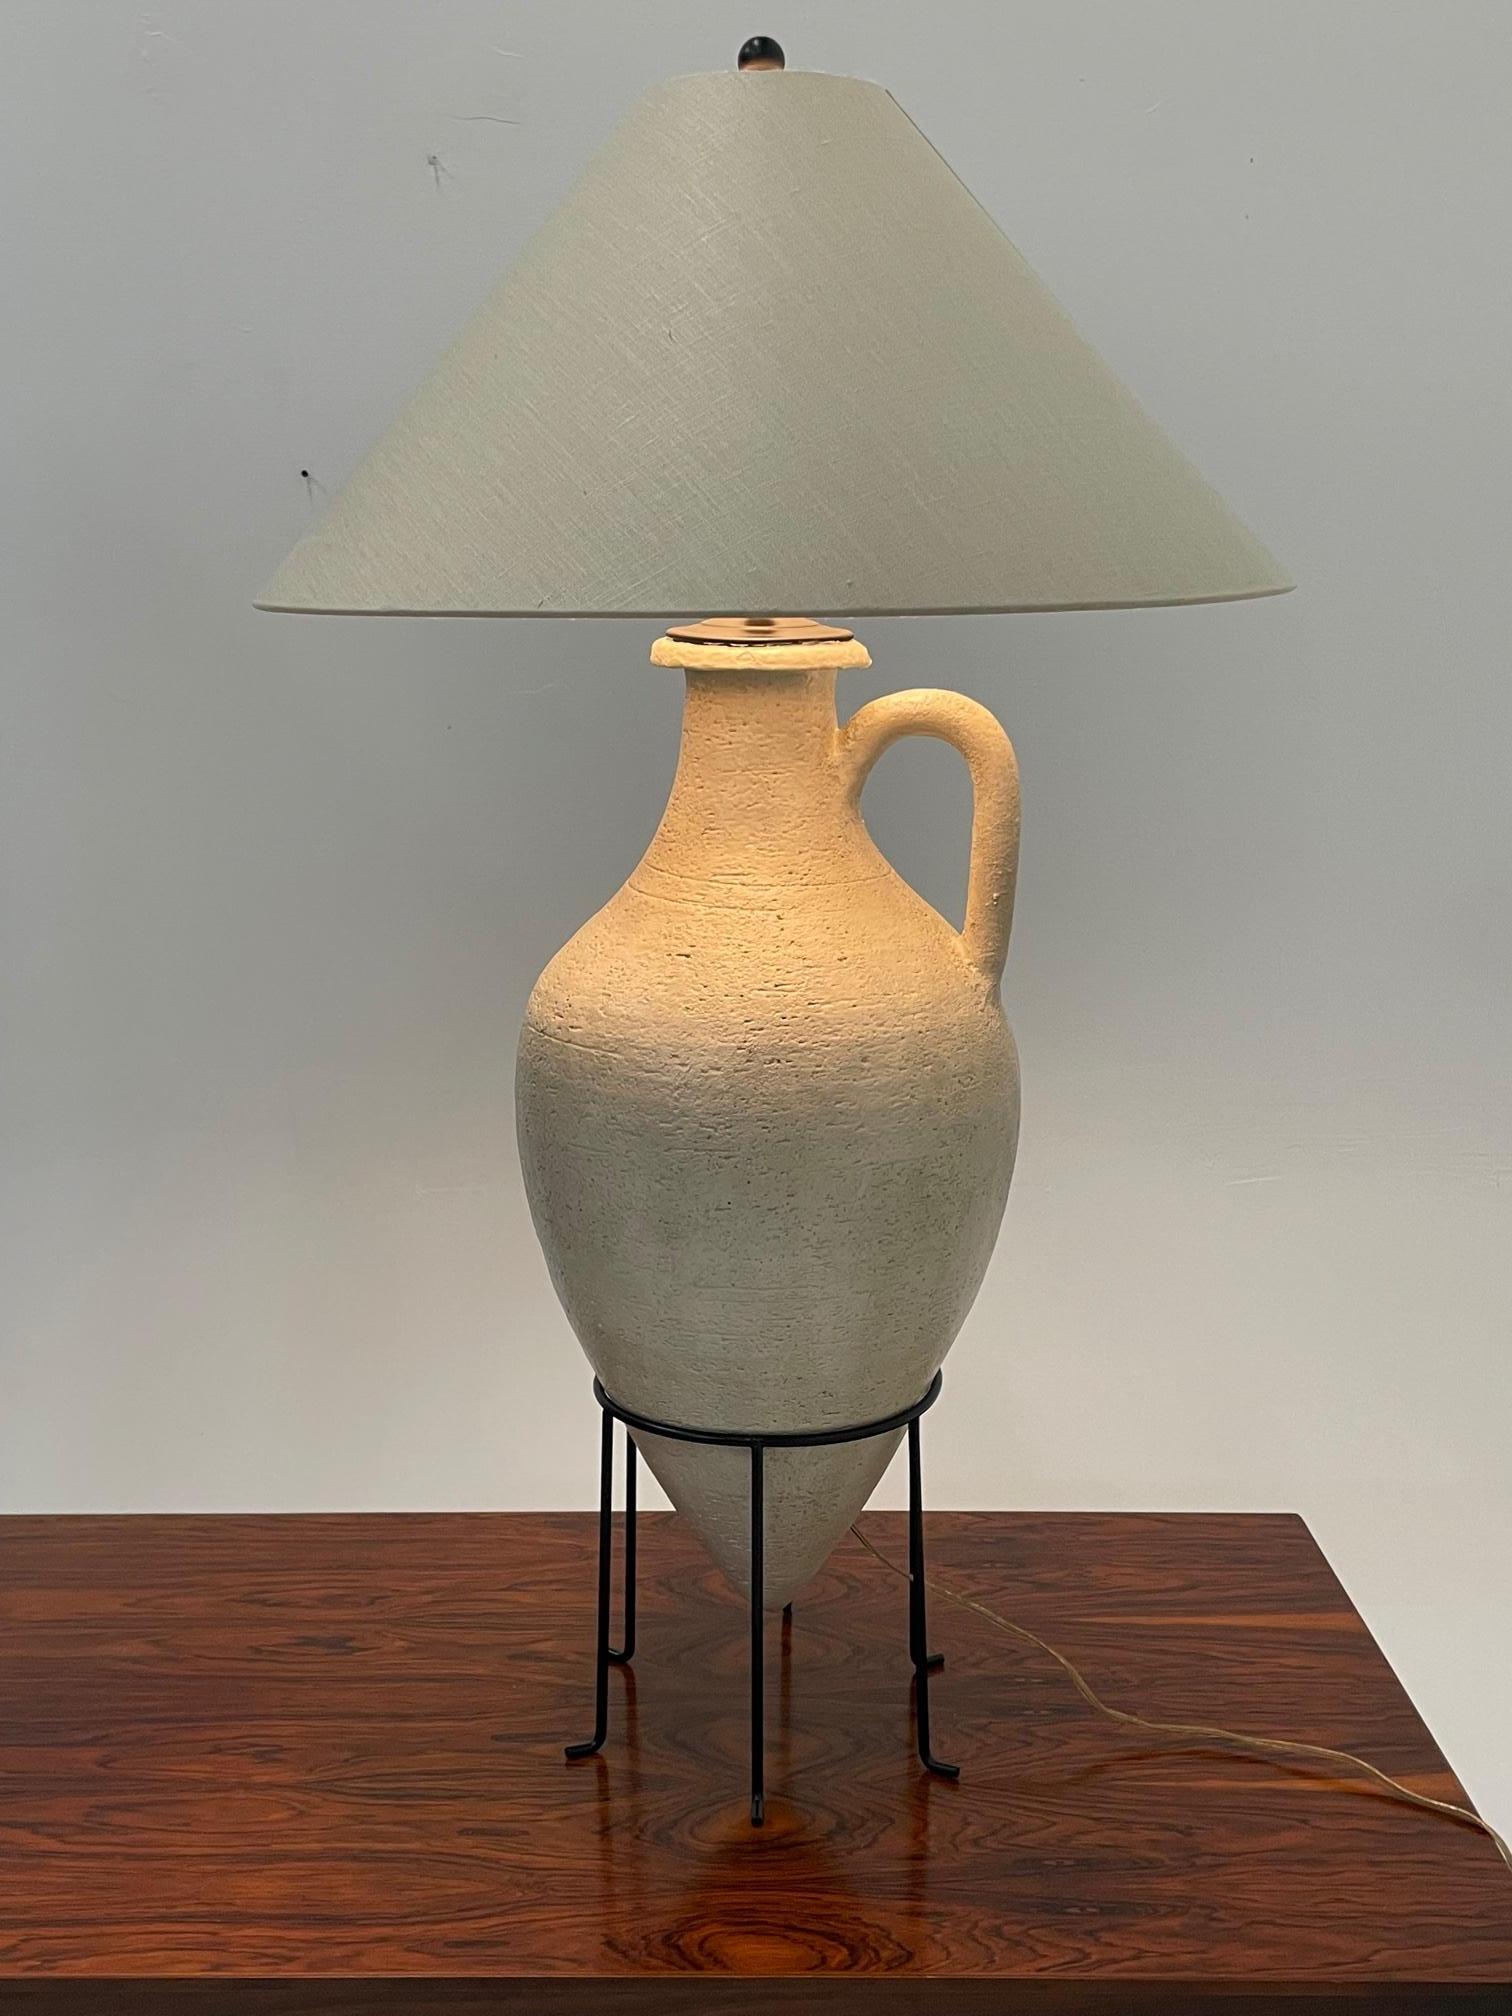 Sculptural painted pottery Grecian style urn lamp having custom metal stand. Shade is not included unless extra cost for shipping. The one shown is linen.